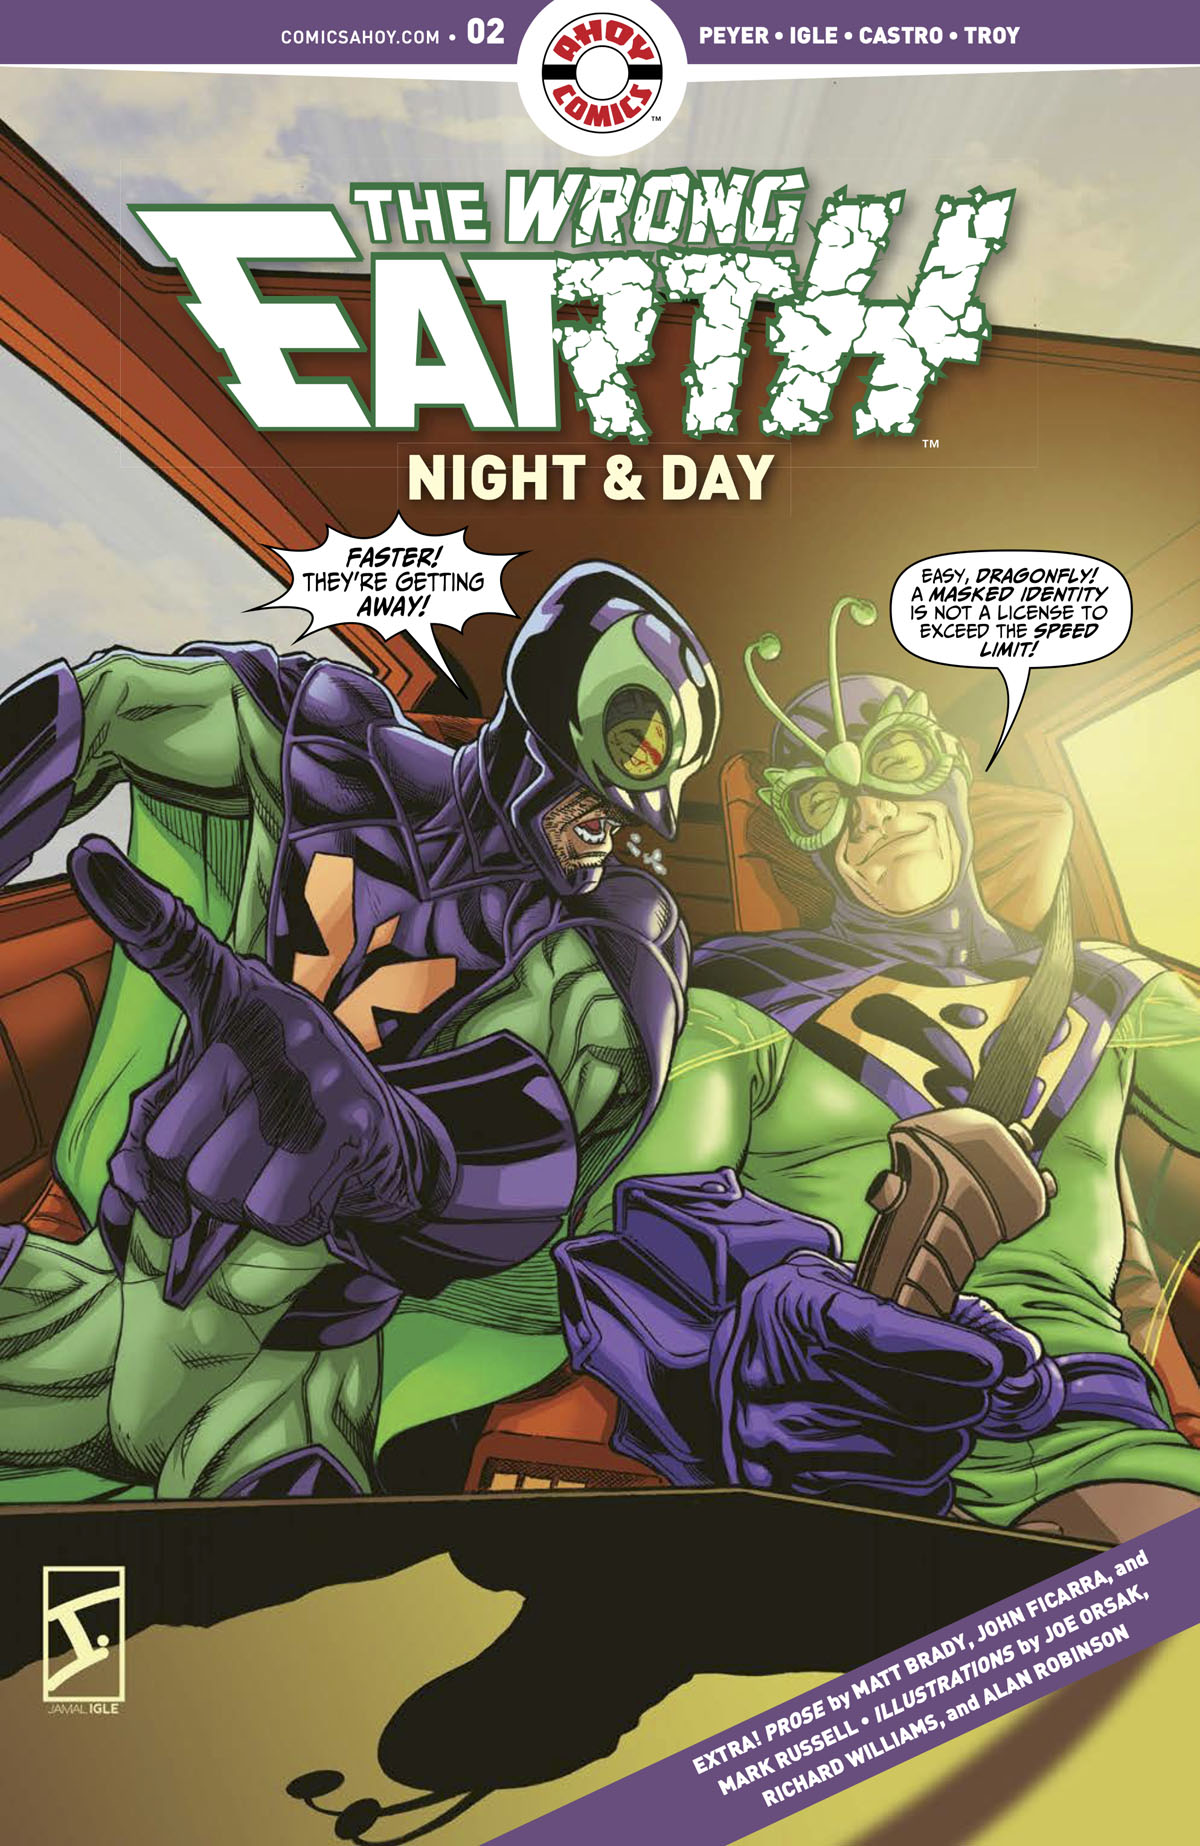 The Wrong Earth: Night & Day #2 cover